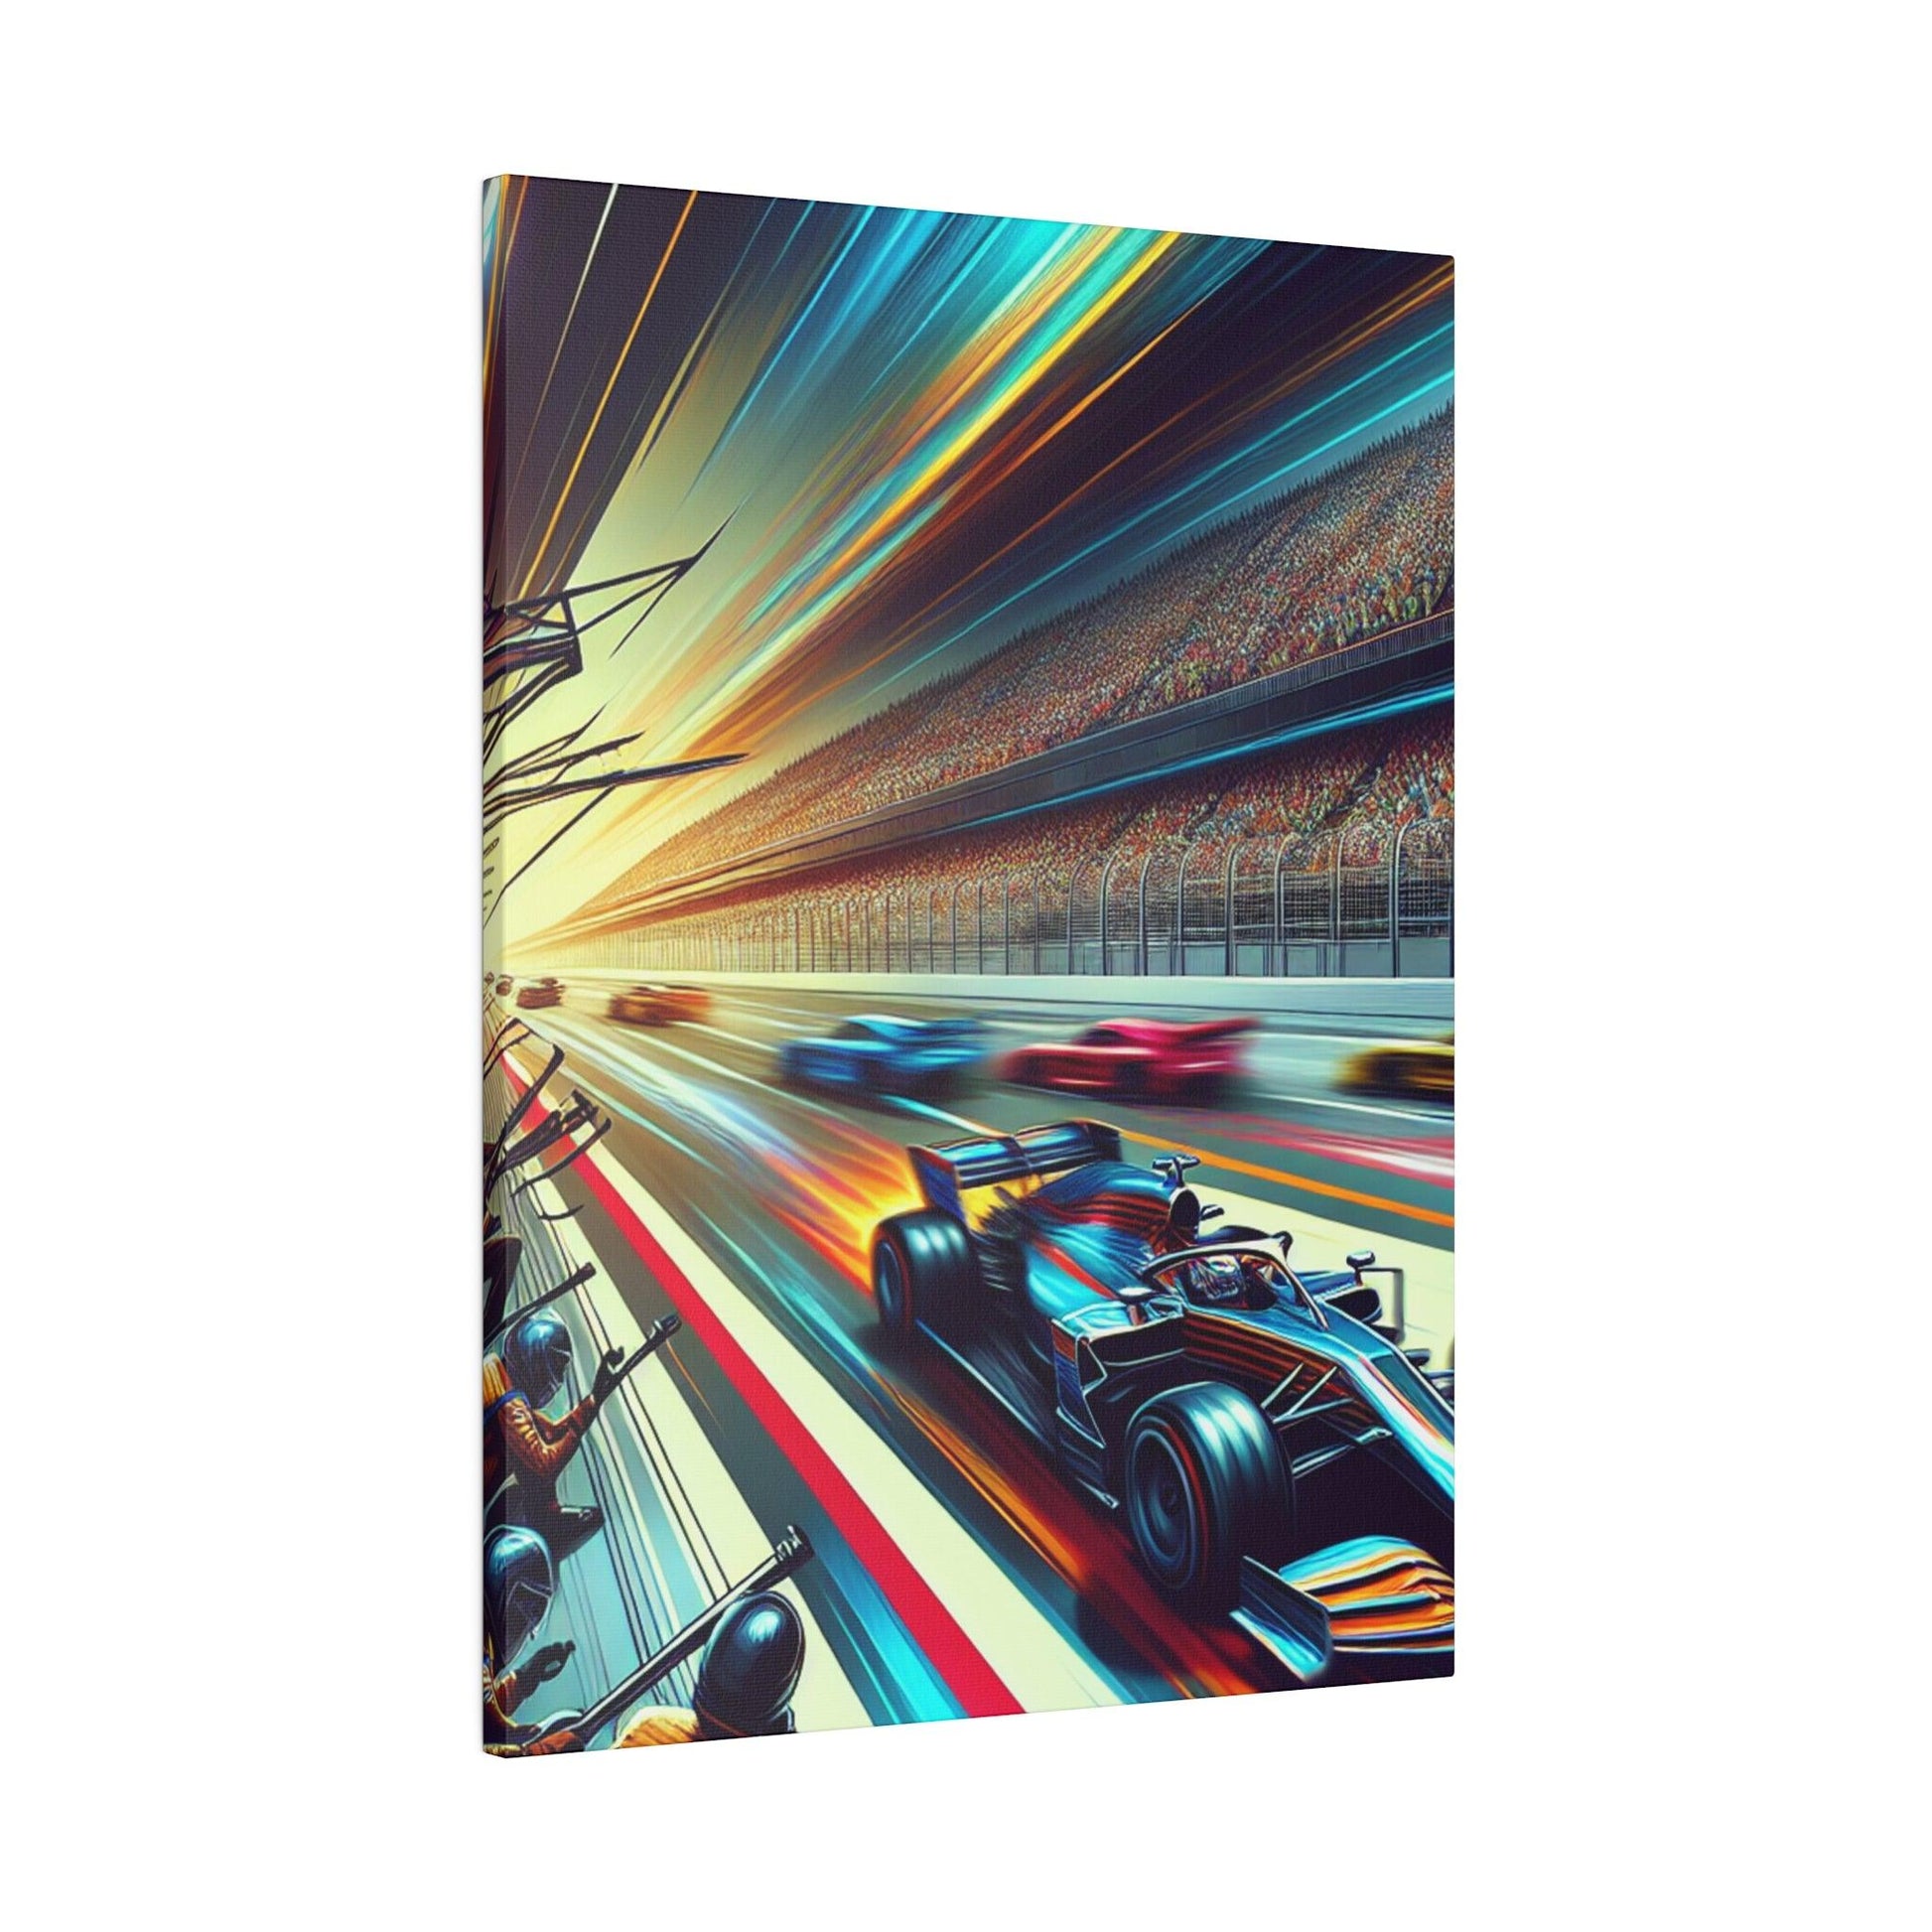 "Thrill Trail: The Canvas Wall Art of the Race Track's Majestic Motions" - The Alice Gallery